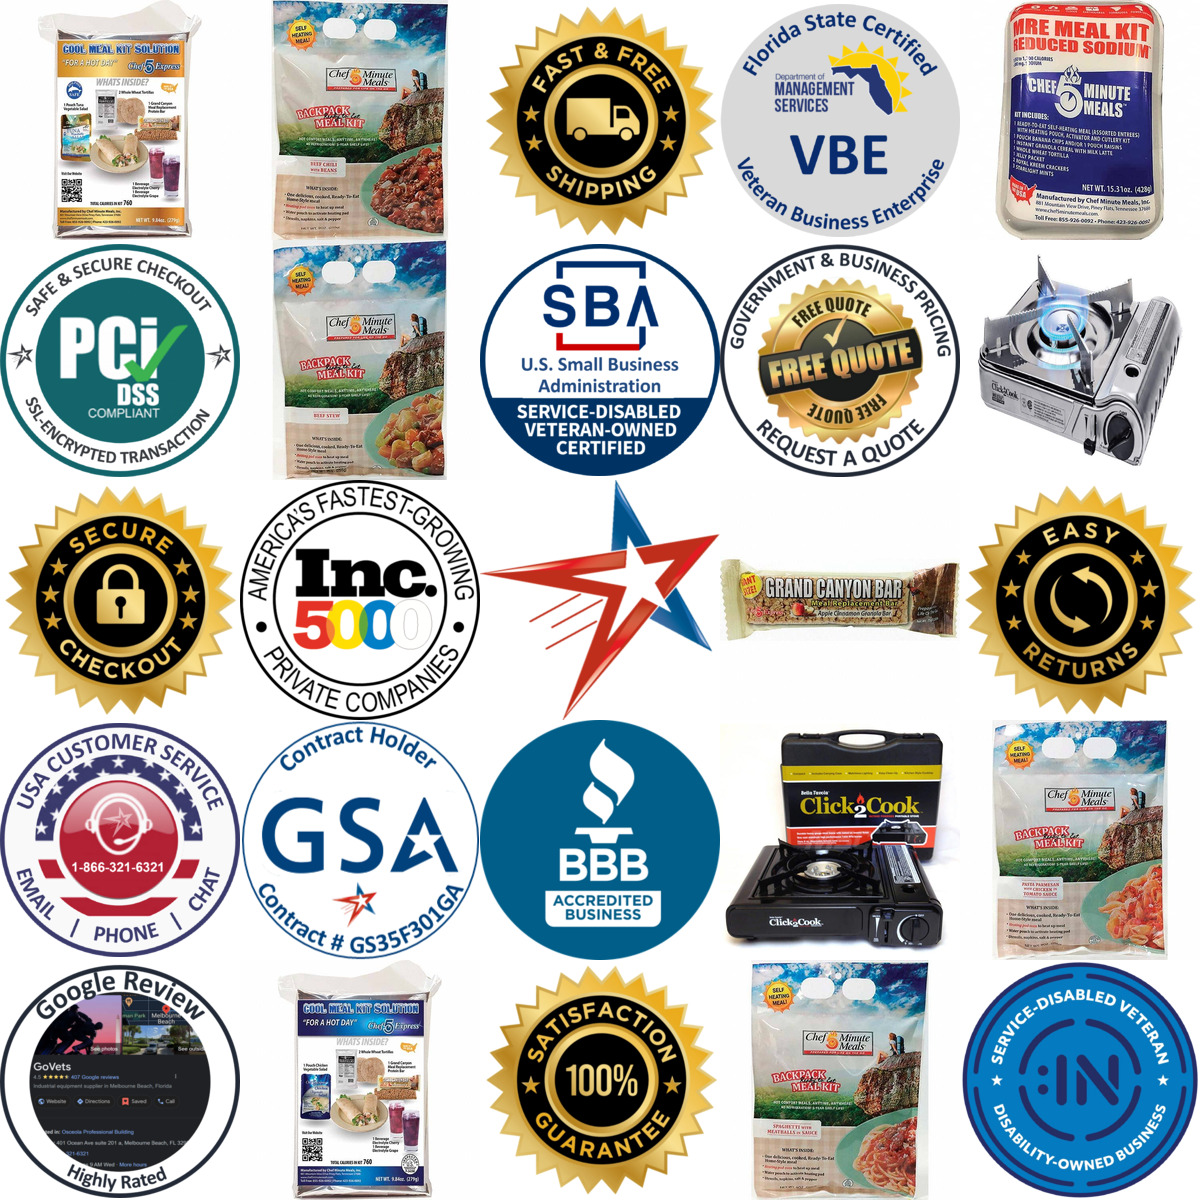 A selection of Emergency Food Supplies and Equipment products on GoVets